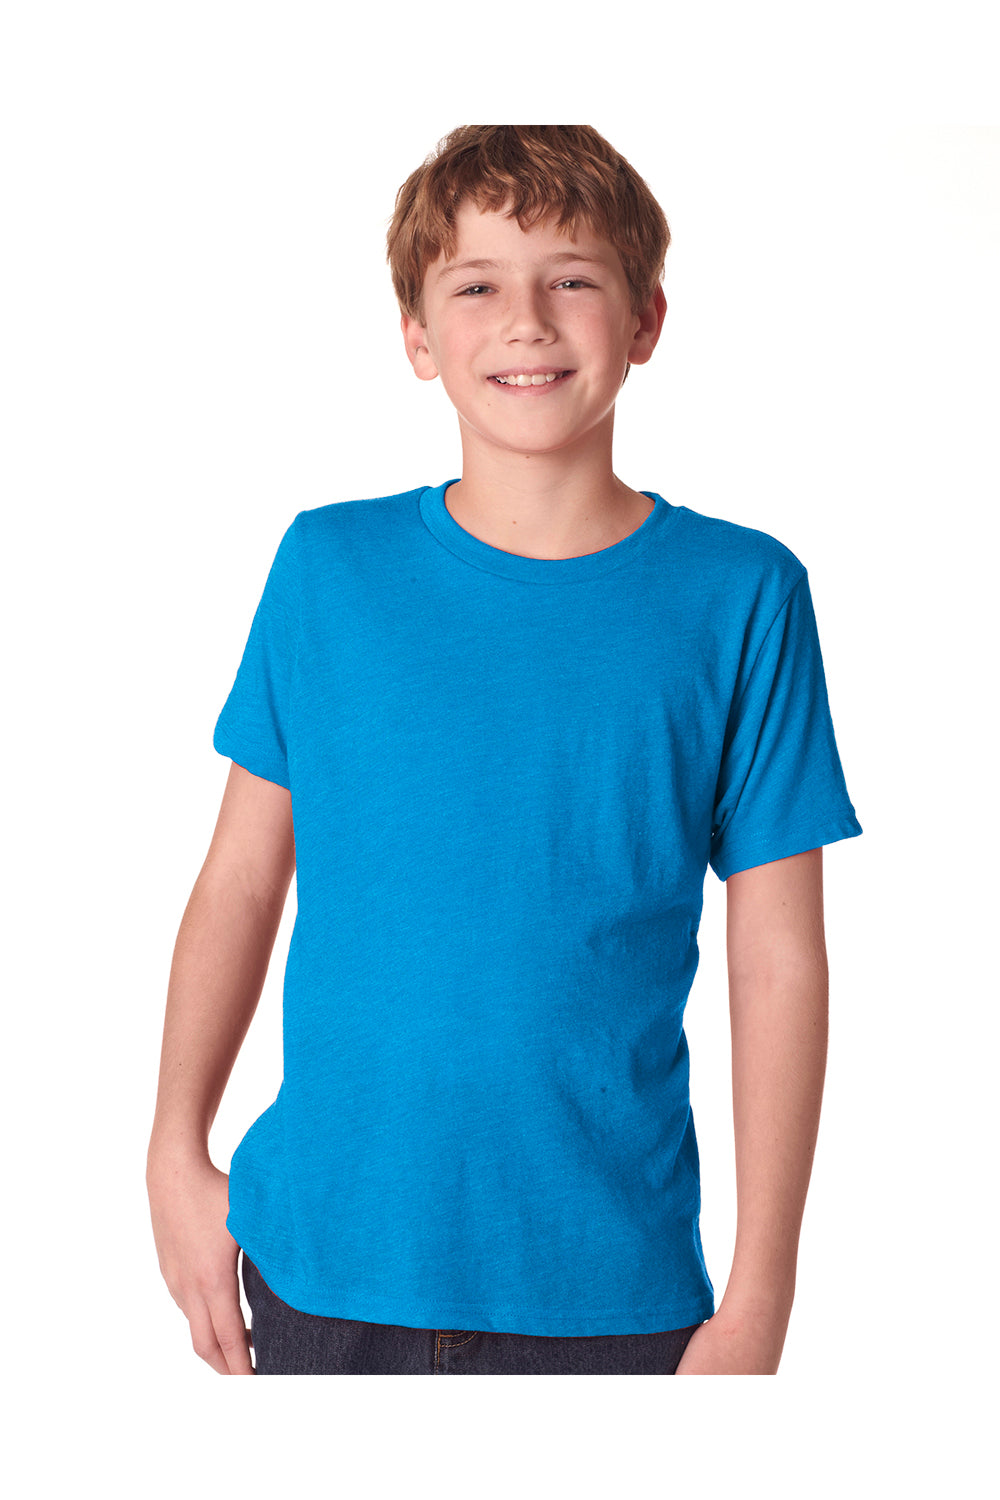 Next Level N6310 Youth Jersey Short Sleeve Crewneck T-Shirt Turquoise Blue Front